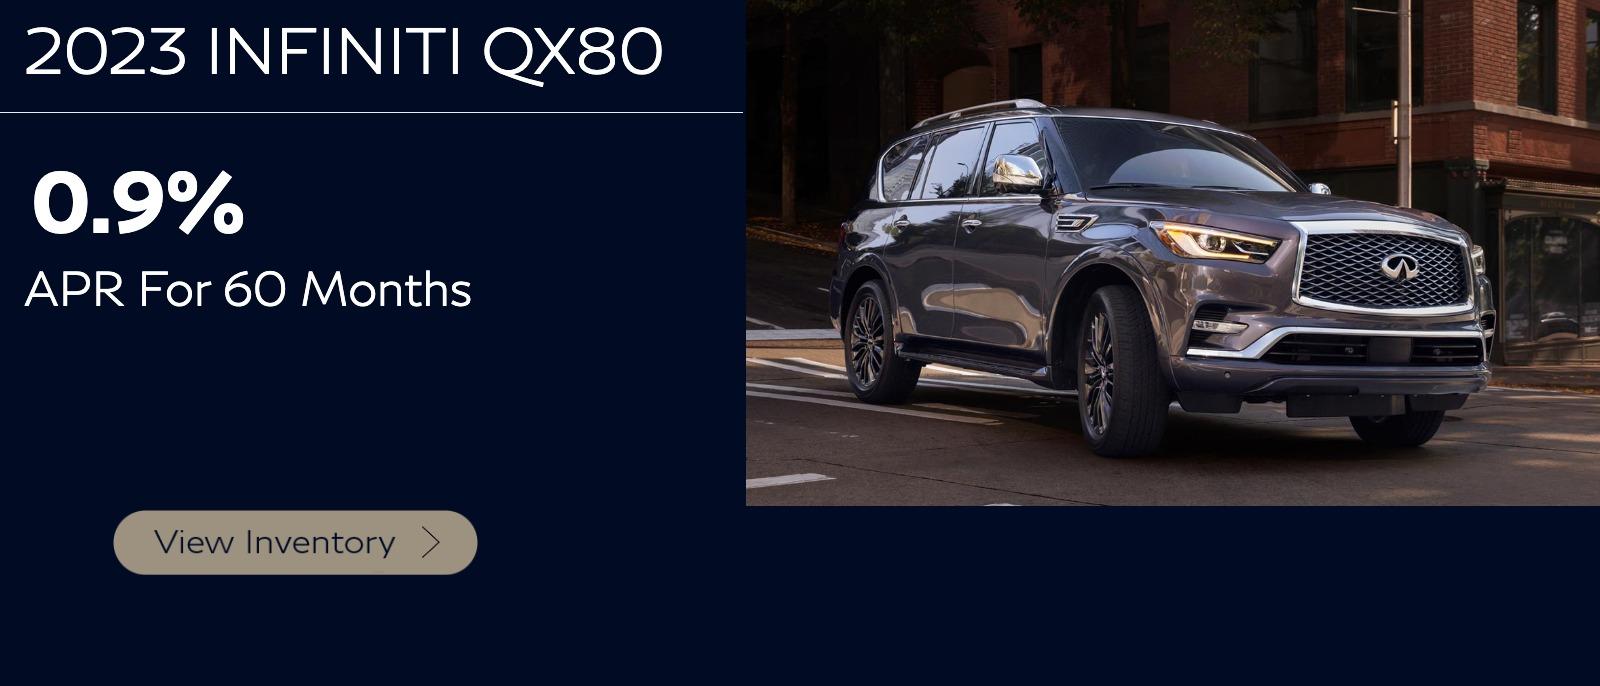 2023 QX80
0.9%* APR for 60 Months